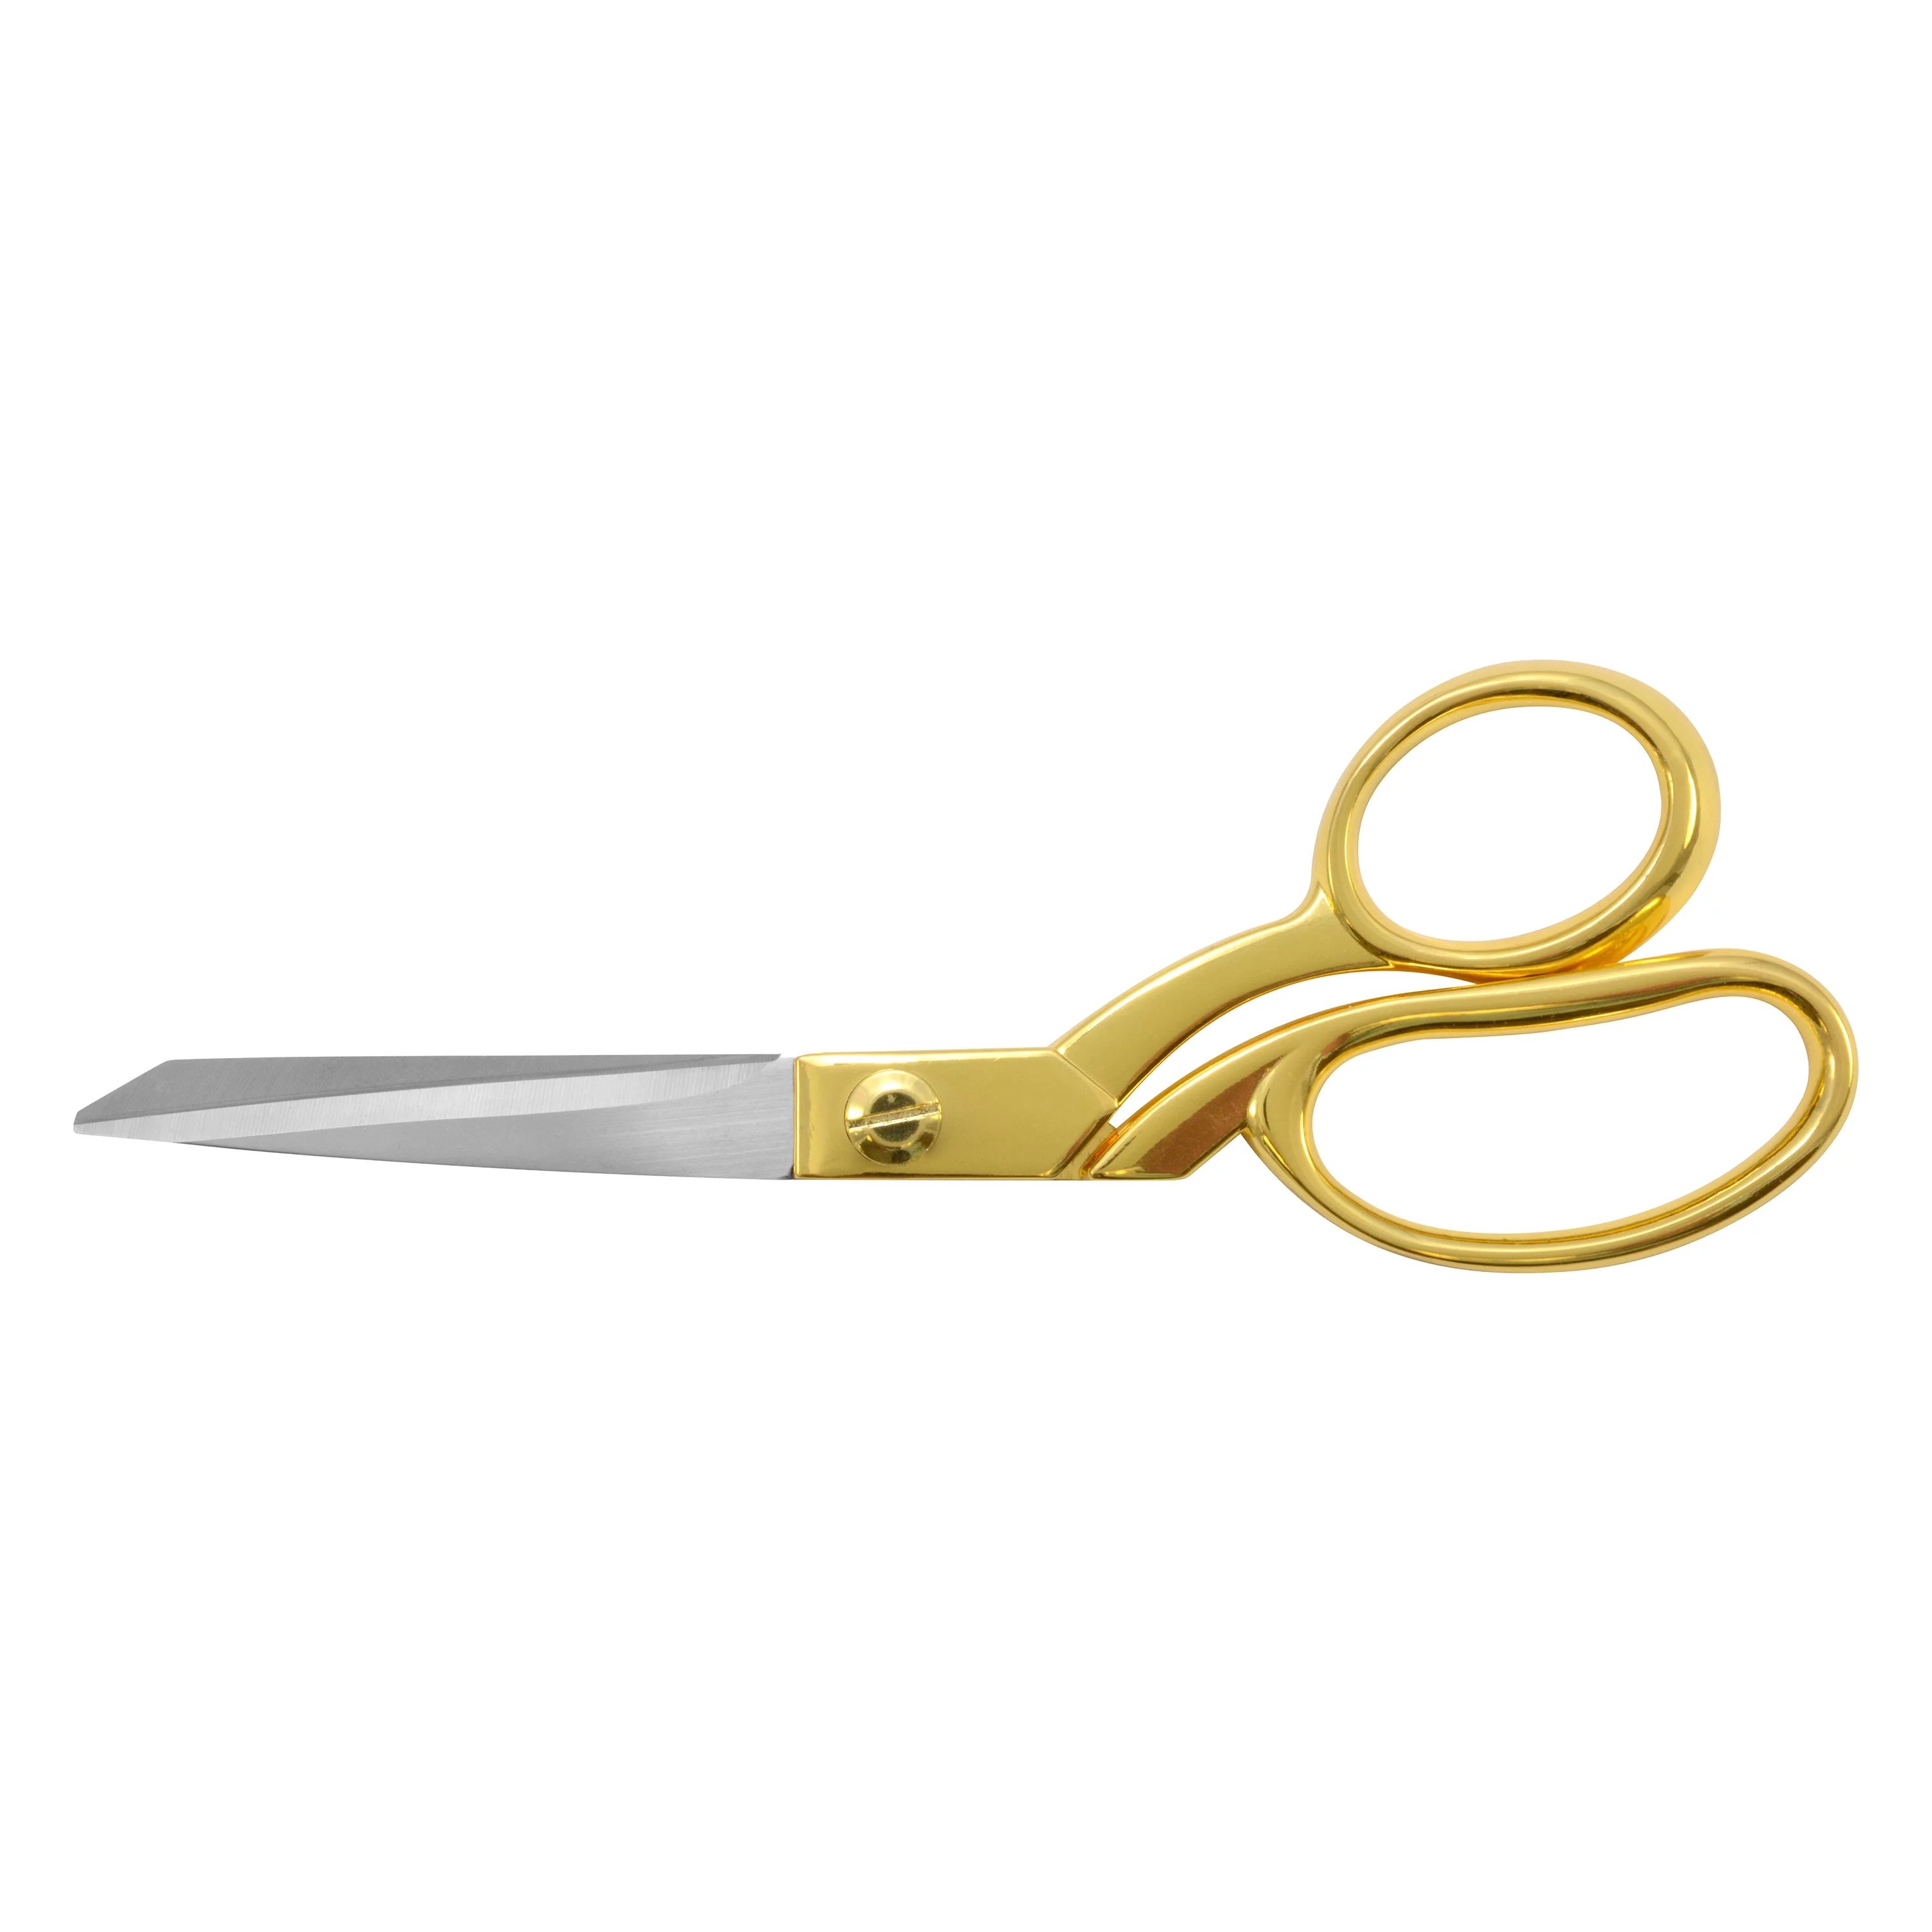 Westcott Fashion Scissors, 8", Stainless Steel, Bent, for Craft, Gold, 1-Count | Walmart (US)